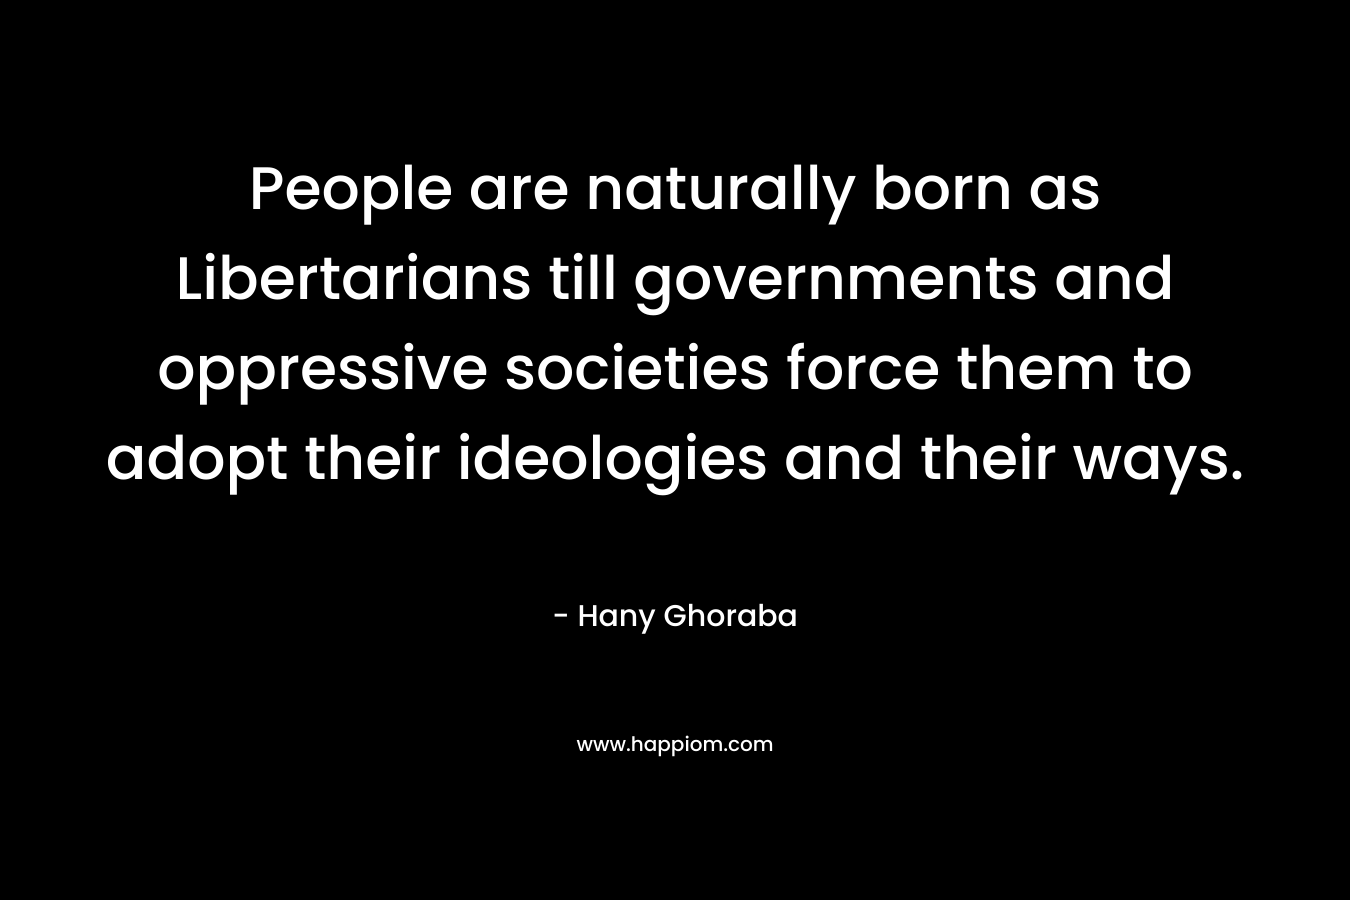 People are naturally born as Libertarians till governments and oppressive societies force them to adopt their ideologies and their ways. – Hany Ghoraba